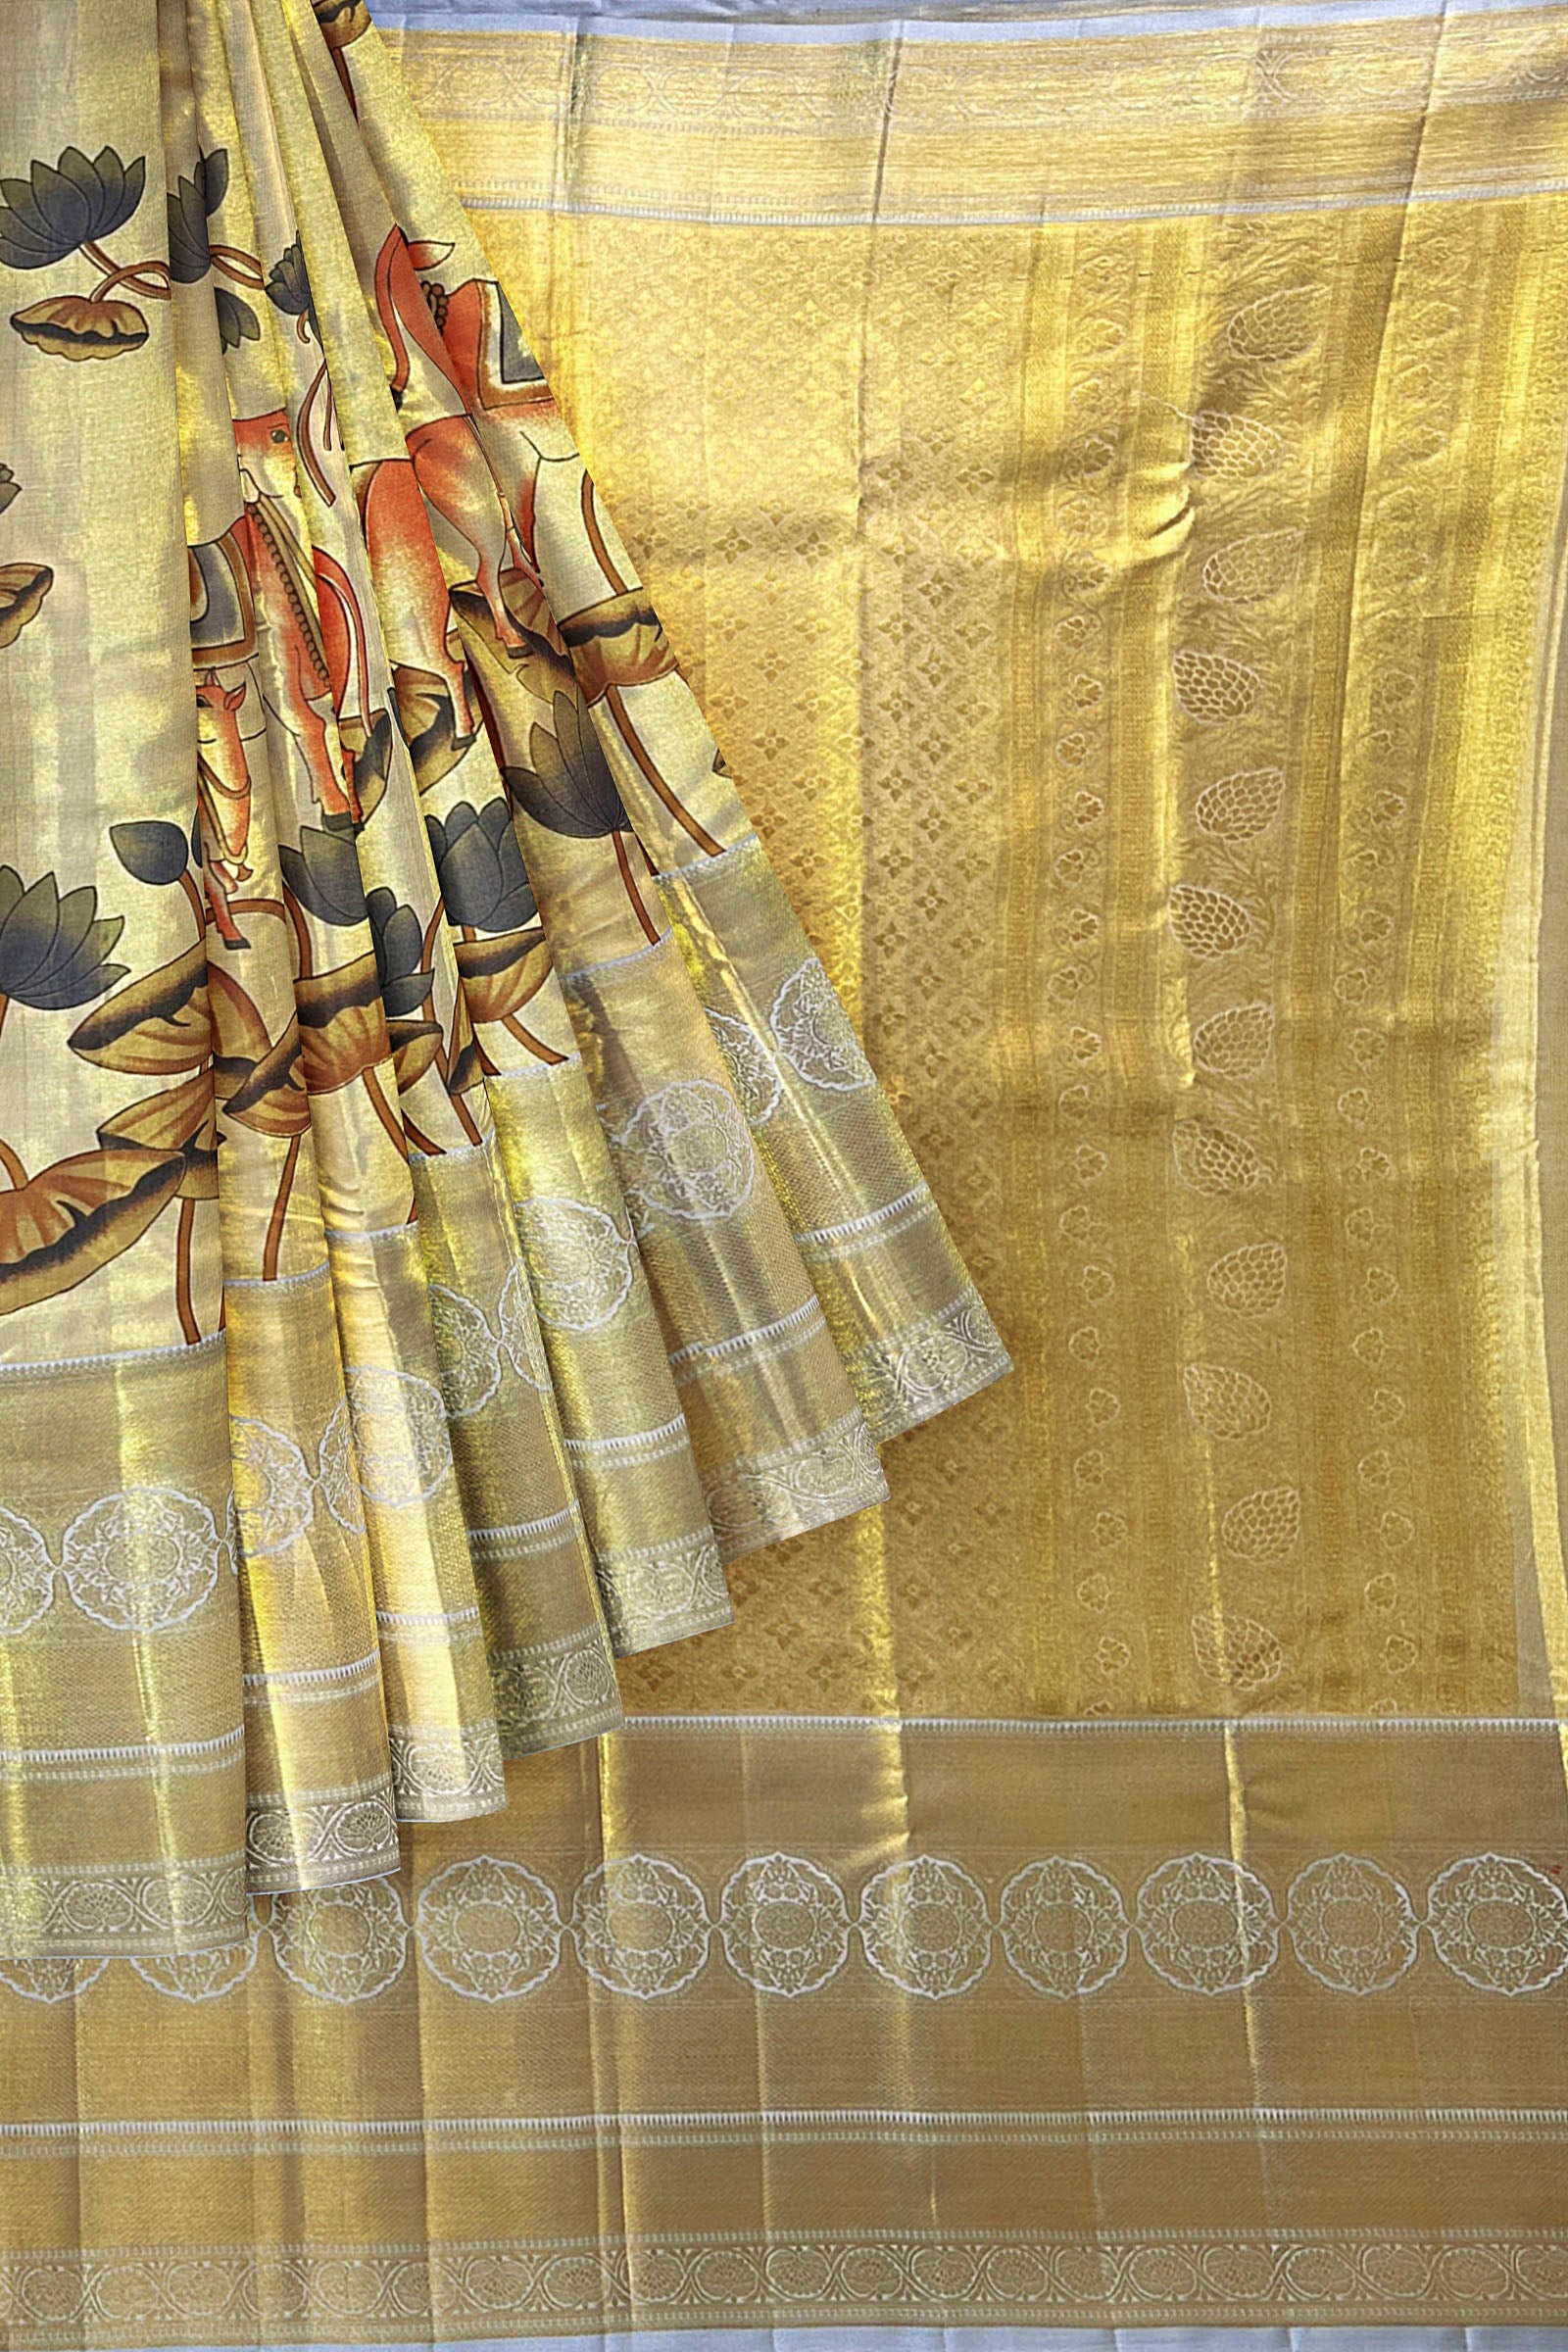 Anya - Where tradition meets fashion - Mom daughter duo in colour  co-ordinated silk kalamkari sarees! Gorgeous pen kalamkari adorning  hand-painted floral motifs in mustard Kanchi silk saree! Shop our exclusive  hand-painted